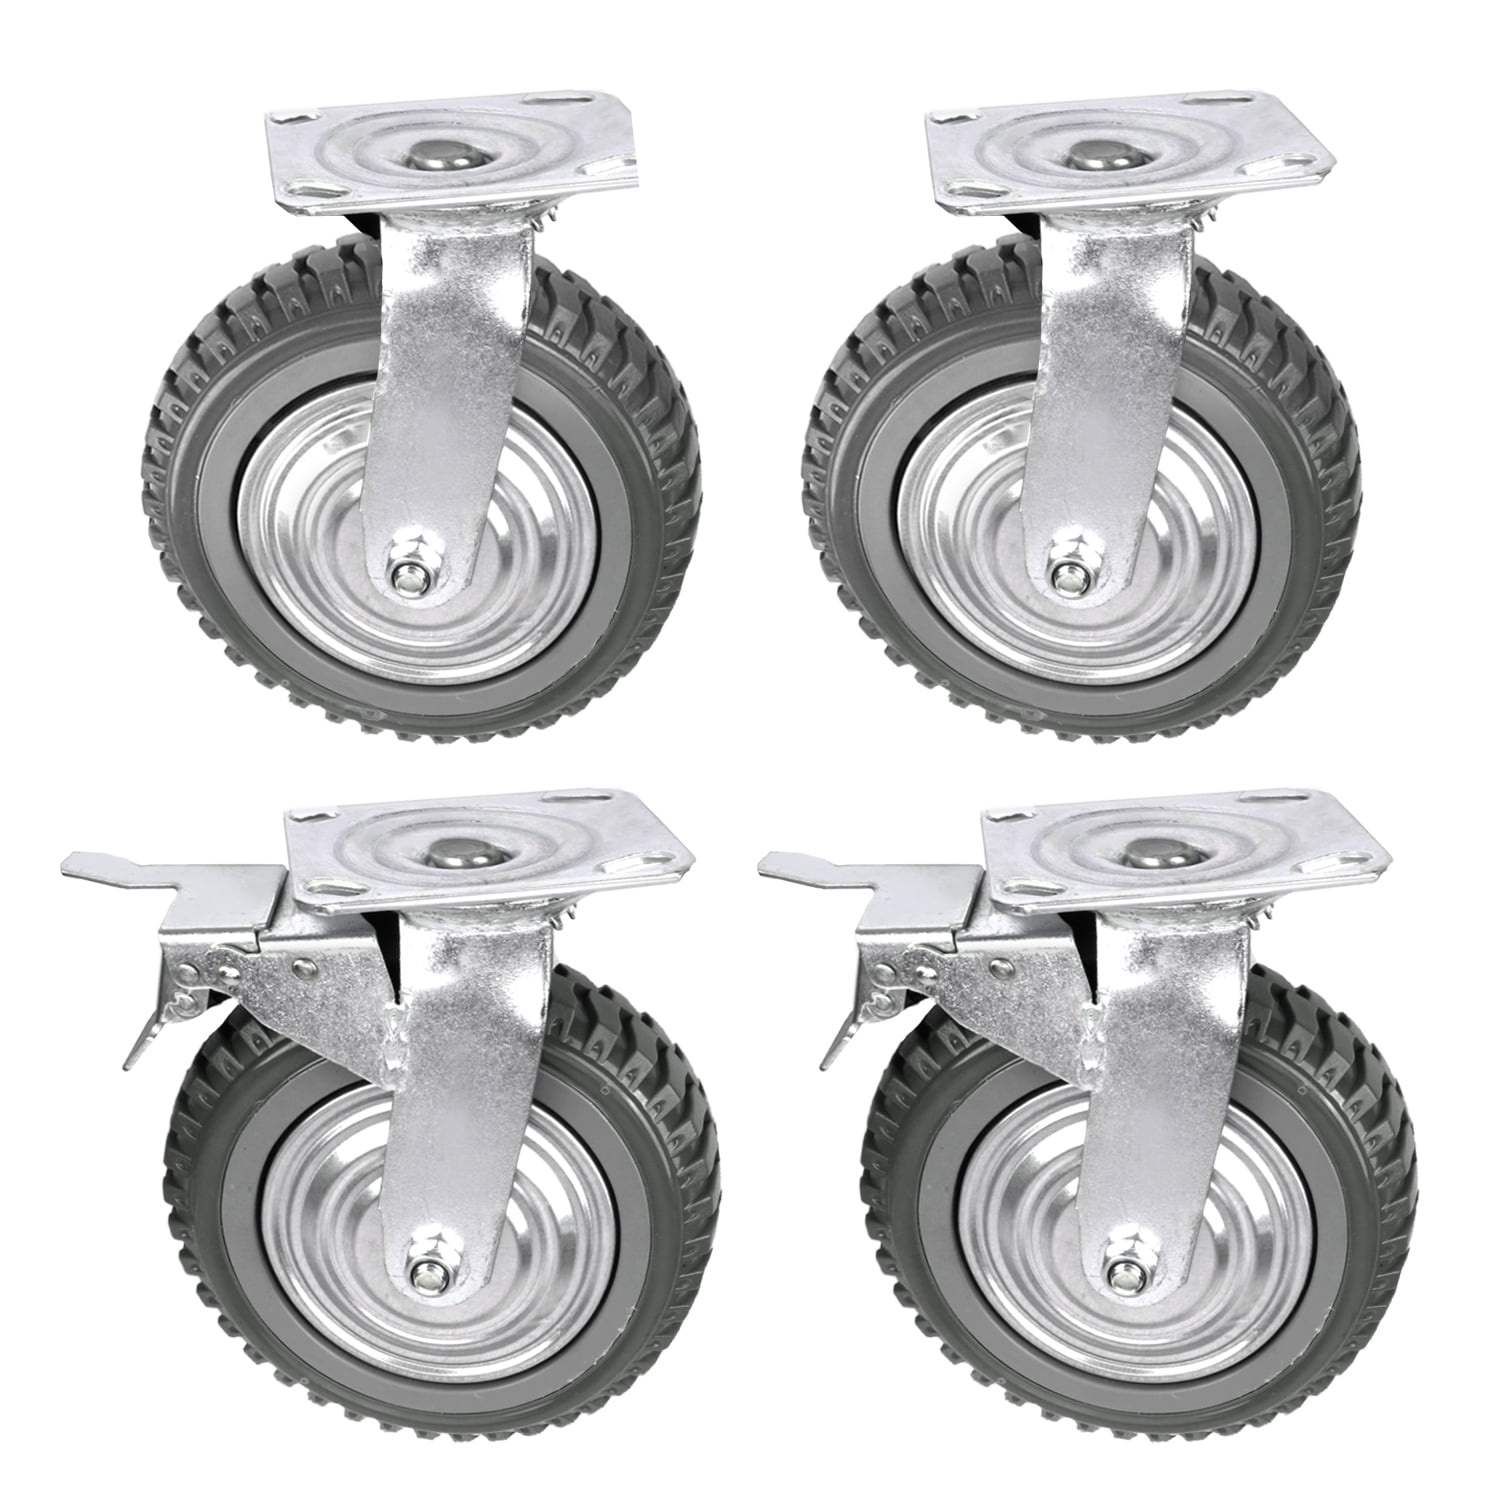 2 with Brake Lock,2 Without Brake Lock 6 Inches Rubber Caster Wheels Anti-Skid Heavy Duty Swivel Casters Wheels with 360 Degree for Set of 4 